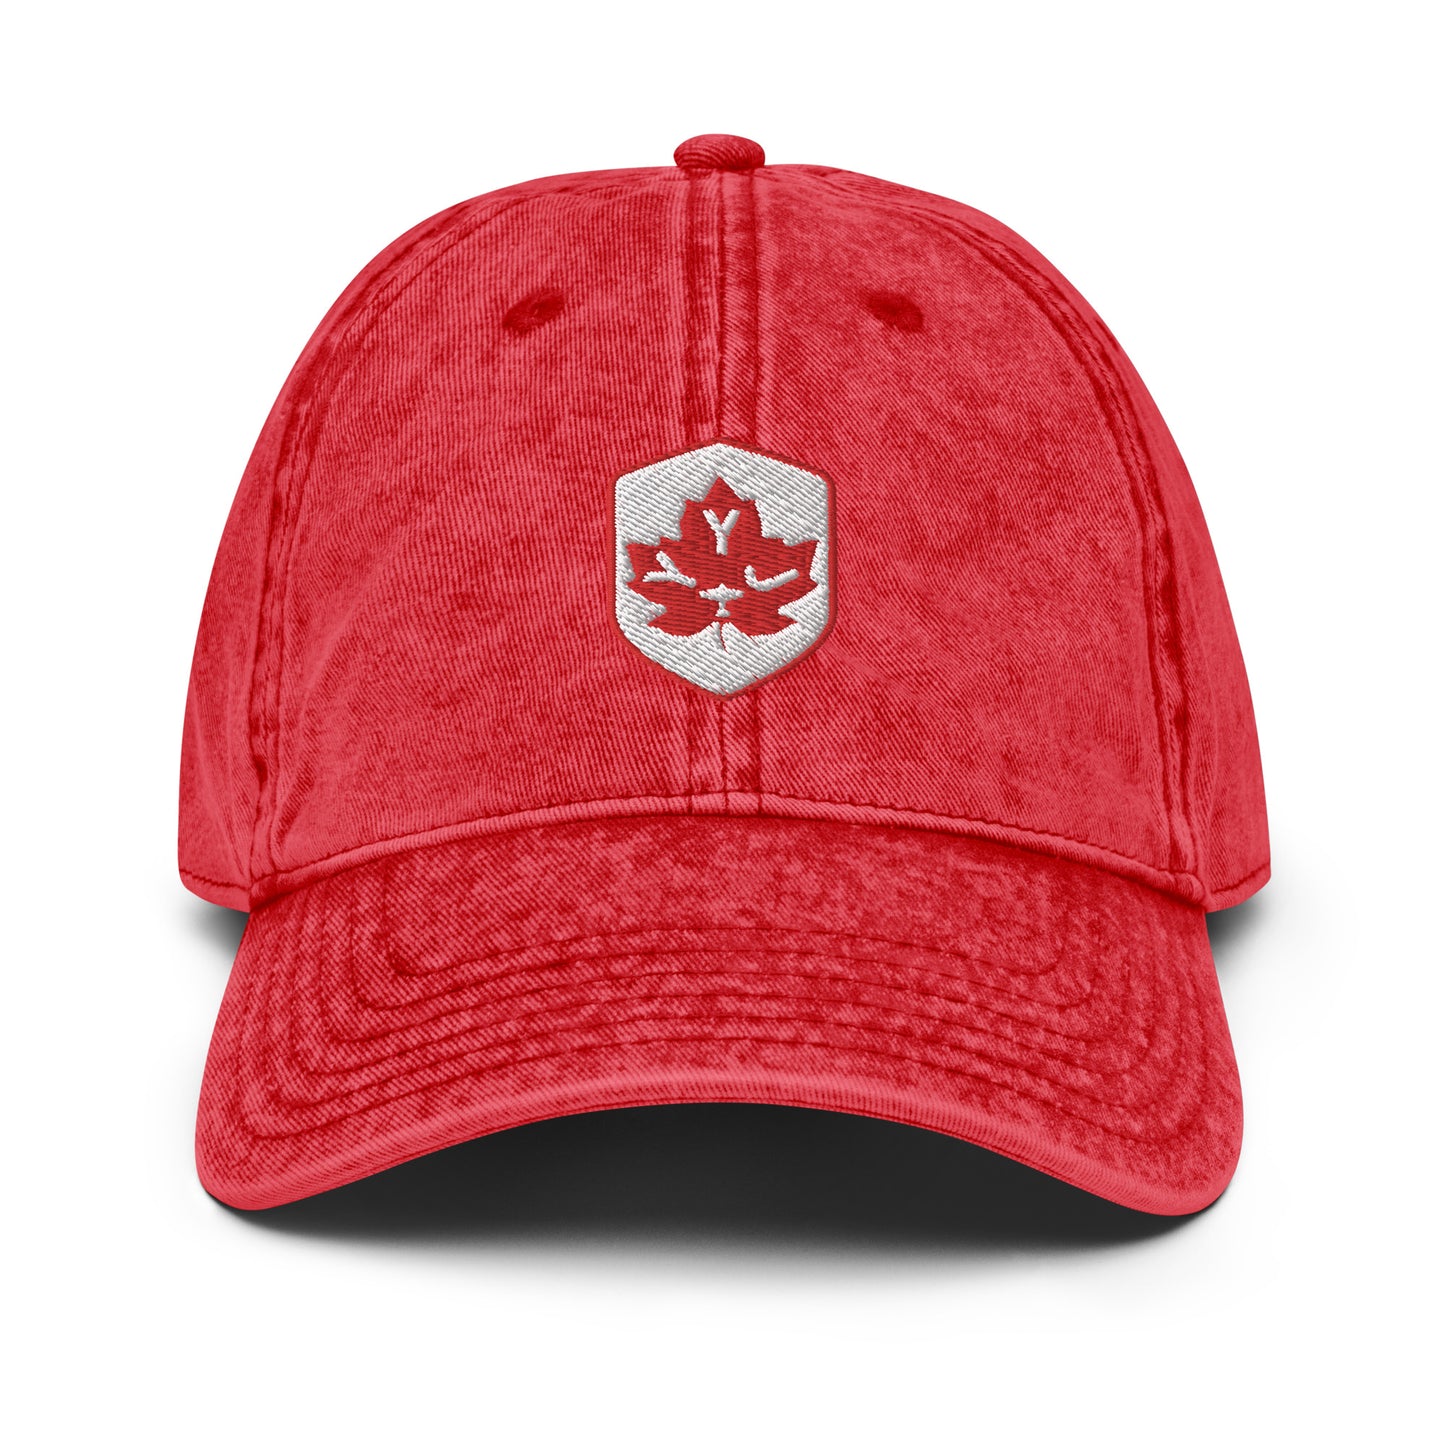 Maple Leaf Twill Cap - Red/White • YYJ Victoria • YHM Designs - Image 19